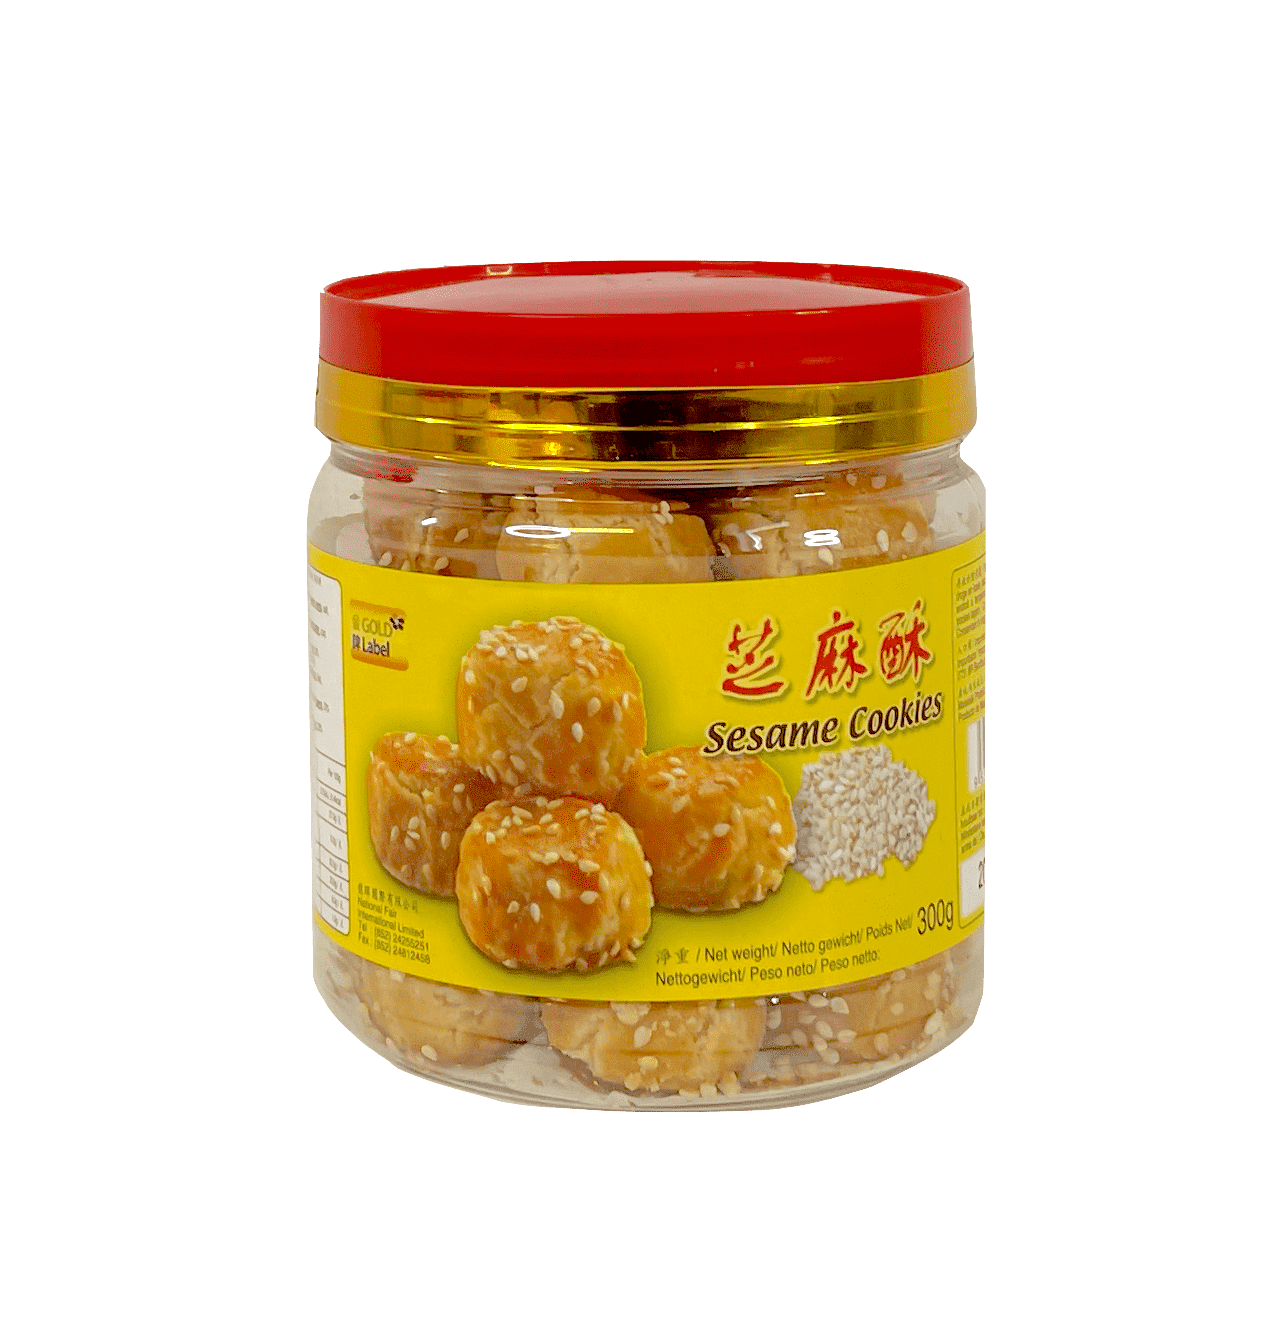 Cookies Sesame 300g Gold Label Malaysia